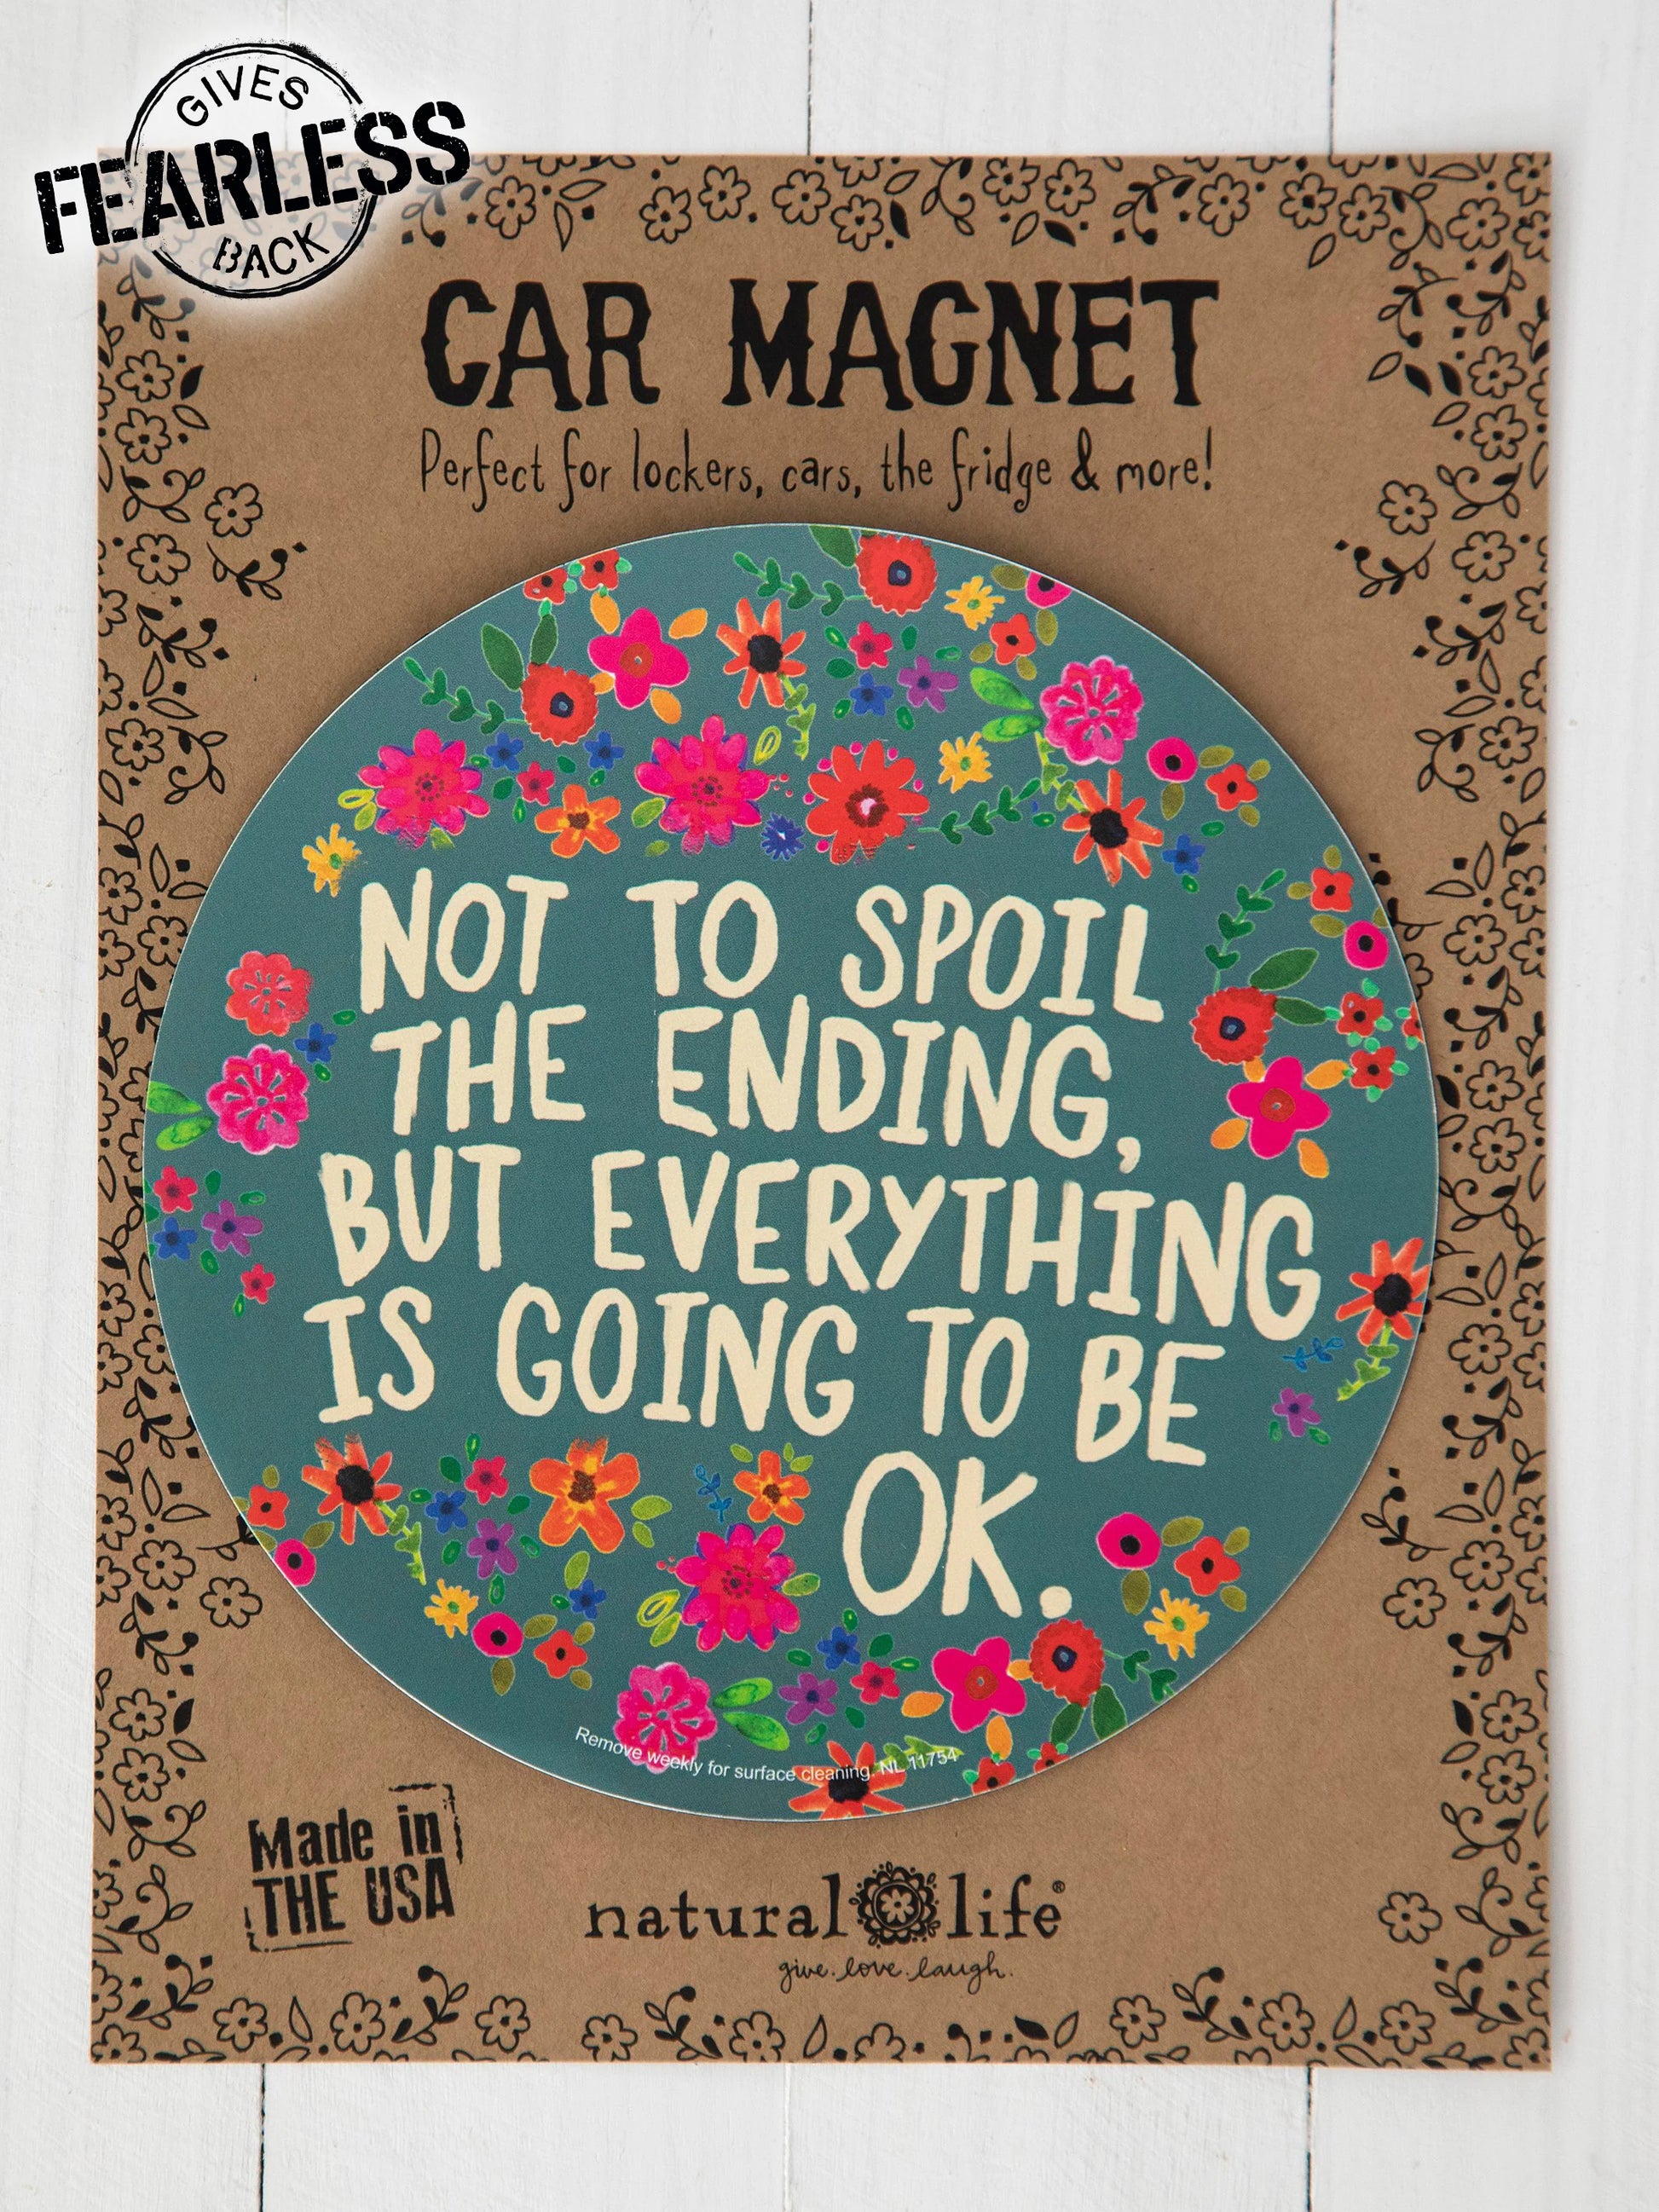 Car Magnet Not To Spoil Ending - The Silver Dahlia